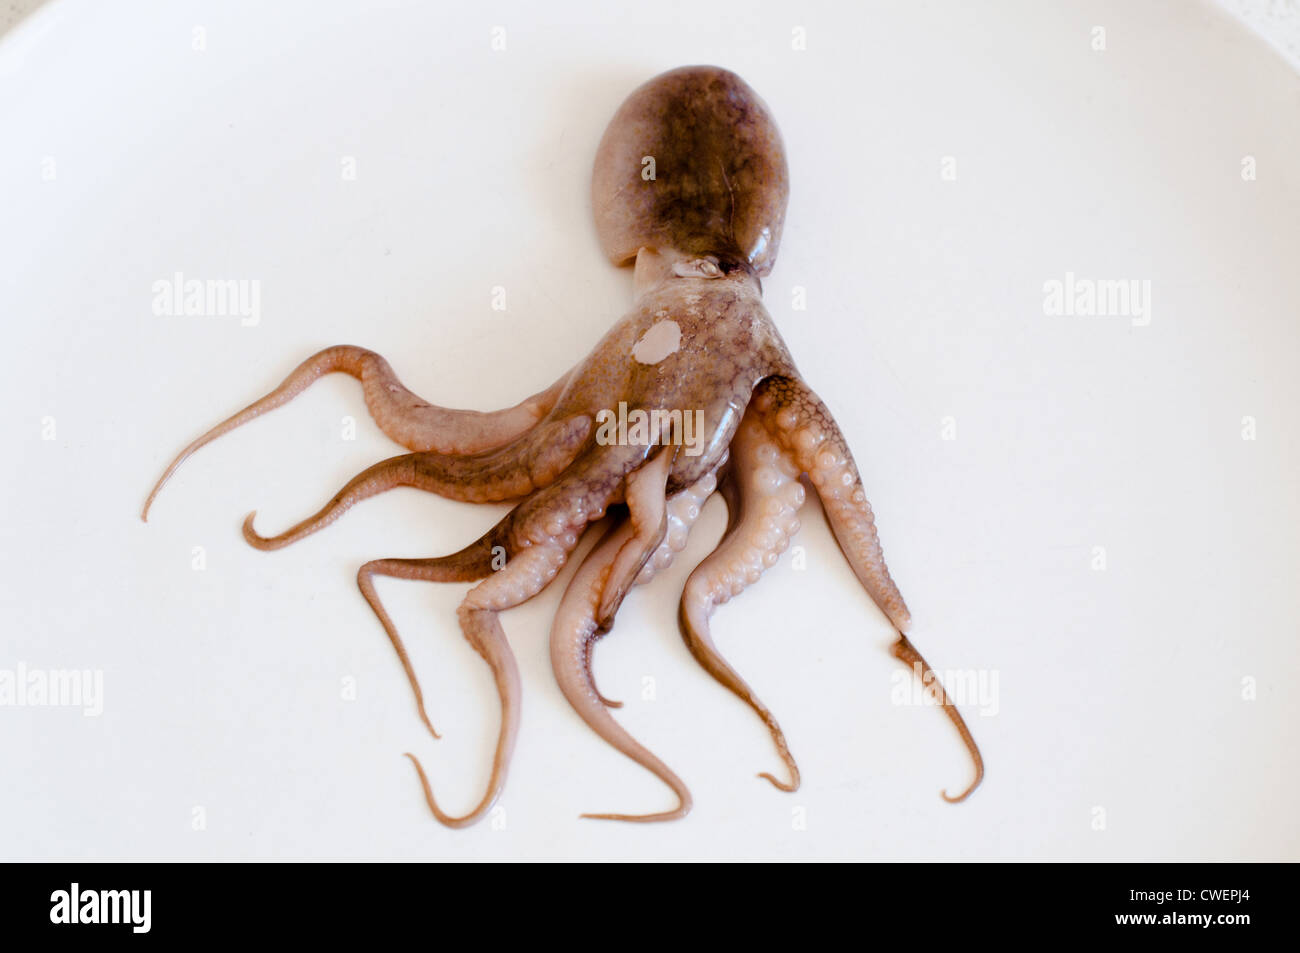 One raw baby octopus (Moscardini) arranged on a white plate Stock Photo